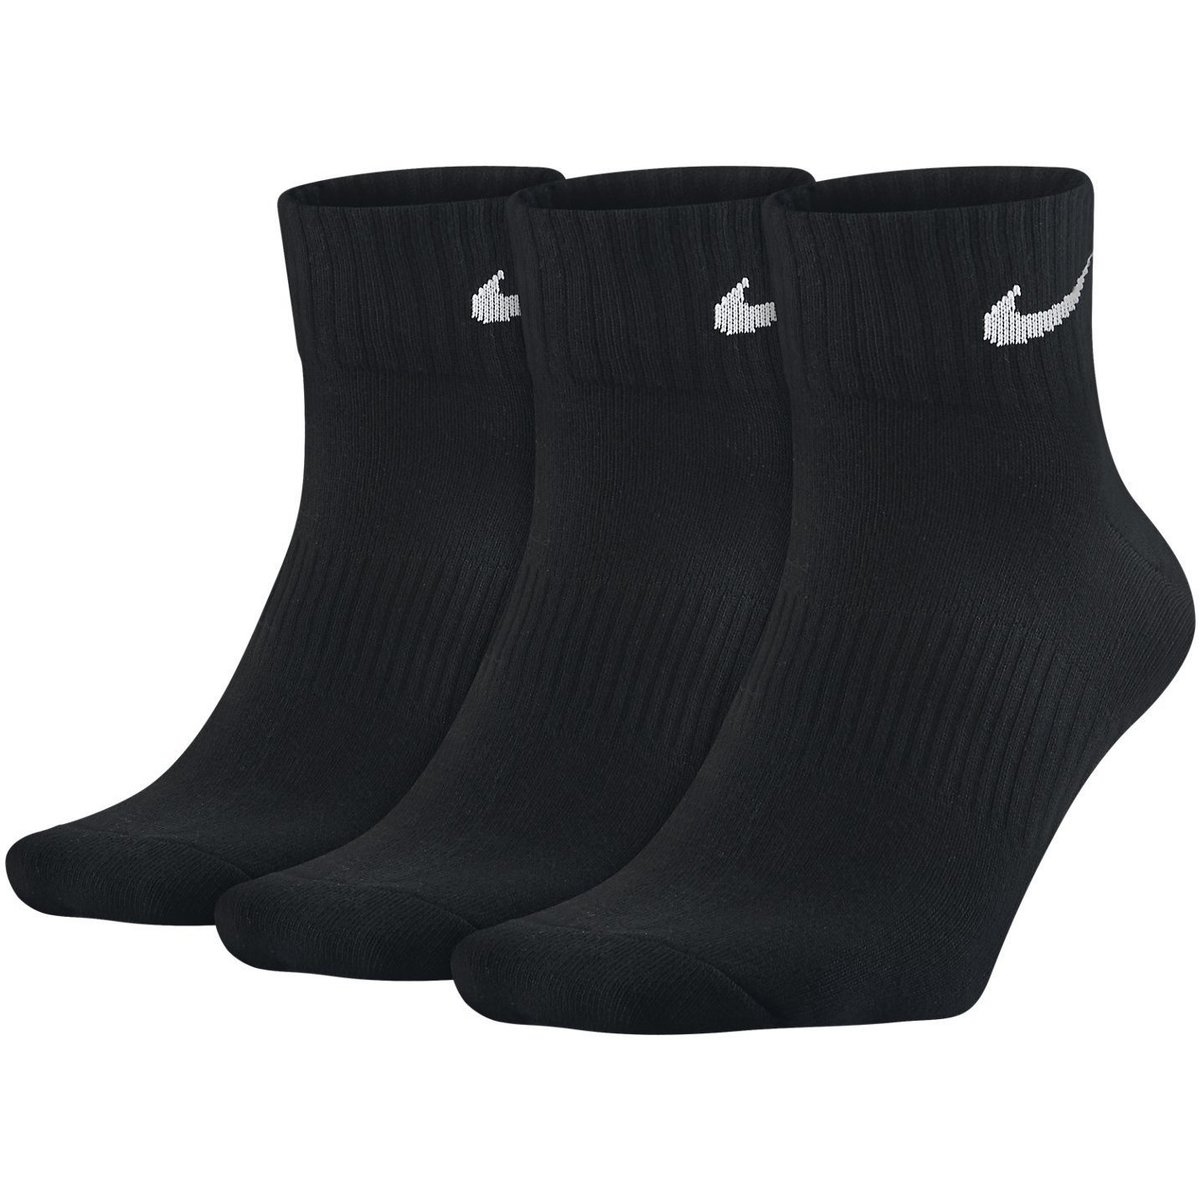 Nike Chaussettes Ankle 3 Paires 15261598 1200 A